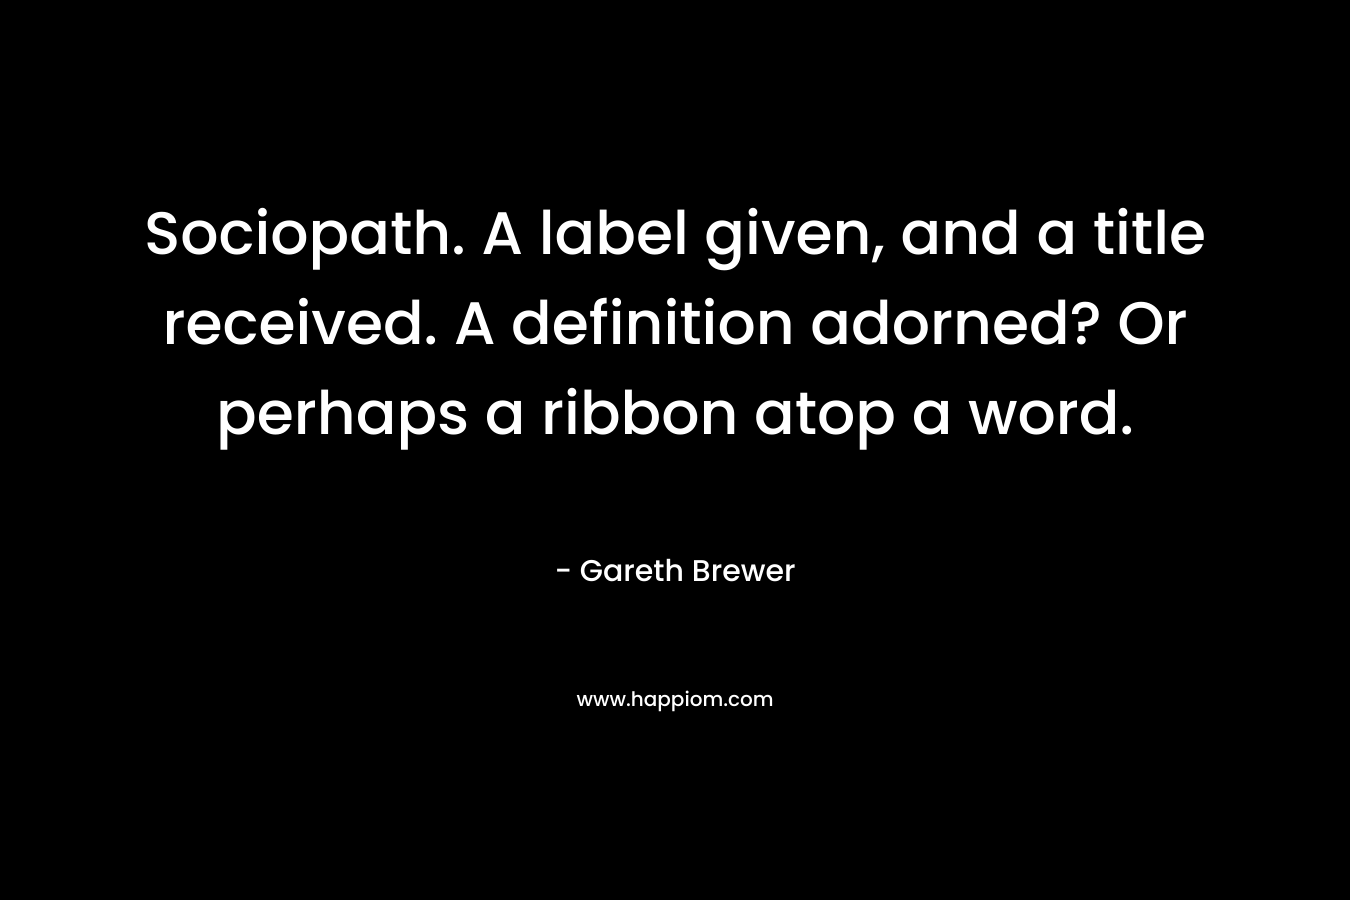 Sociopath. A label given, and a title received. A definition adorned? Or perhaps a ribbon atop a word. – Gareth Brewer